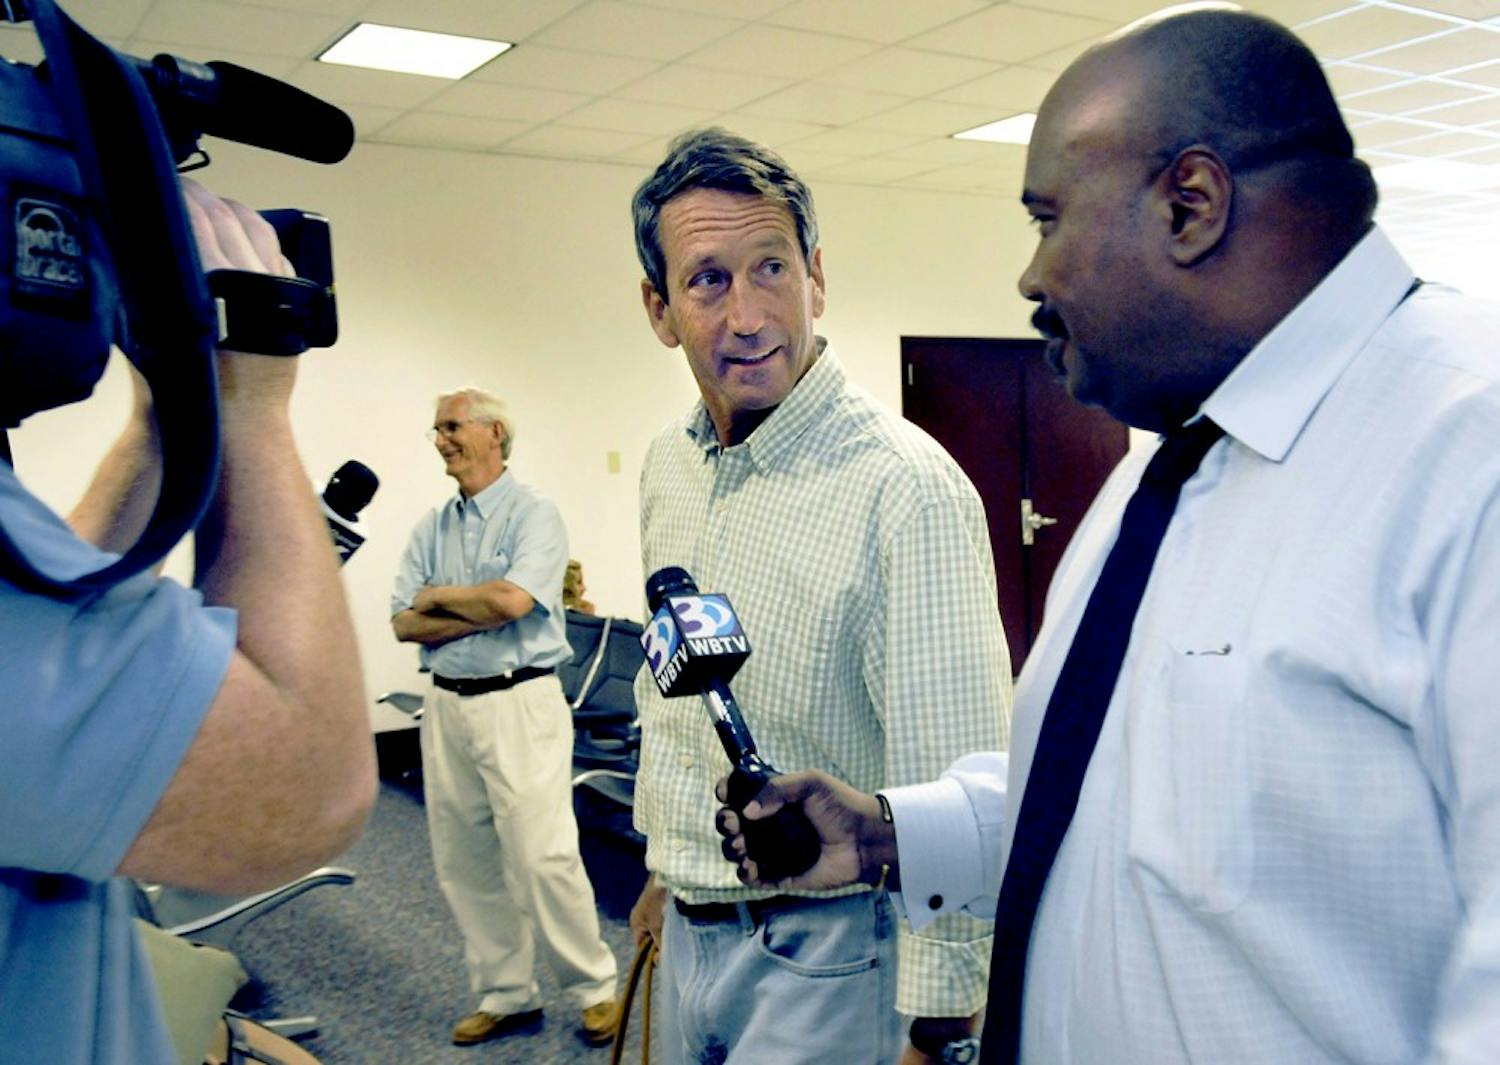 South Carolina Gov. Mark Sanford talks with reporters after his flight from London, England landed at Charlotte Douglas international Airport in Charlotte, North Carolina, Wednesday, August 5, 2009. (John D. Simmons/Charlotte Observer/MCT)